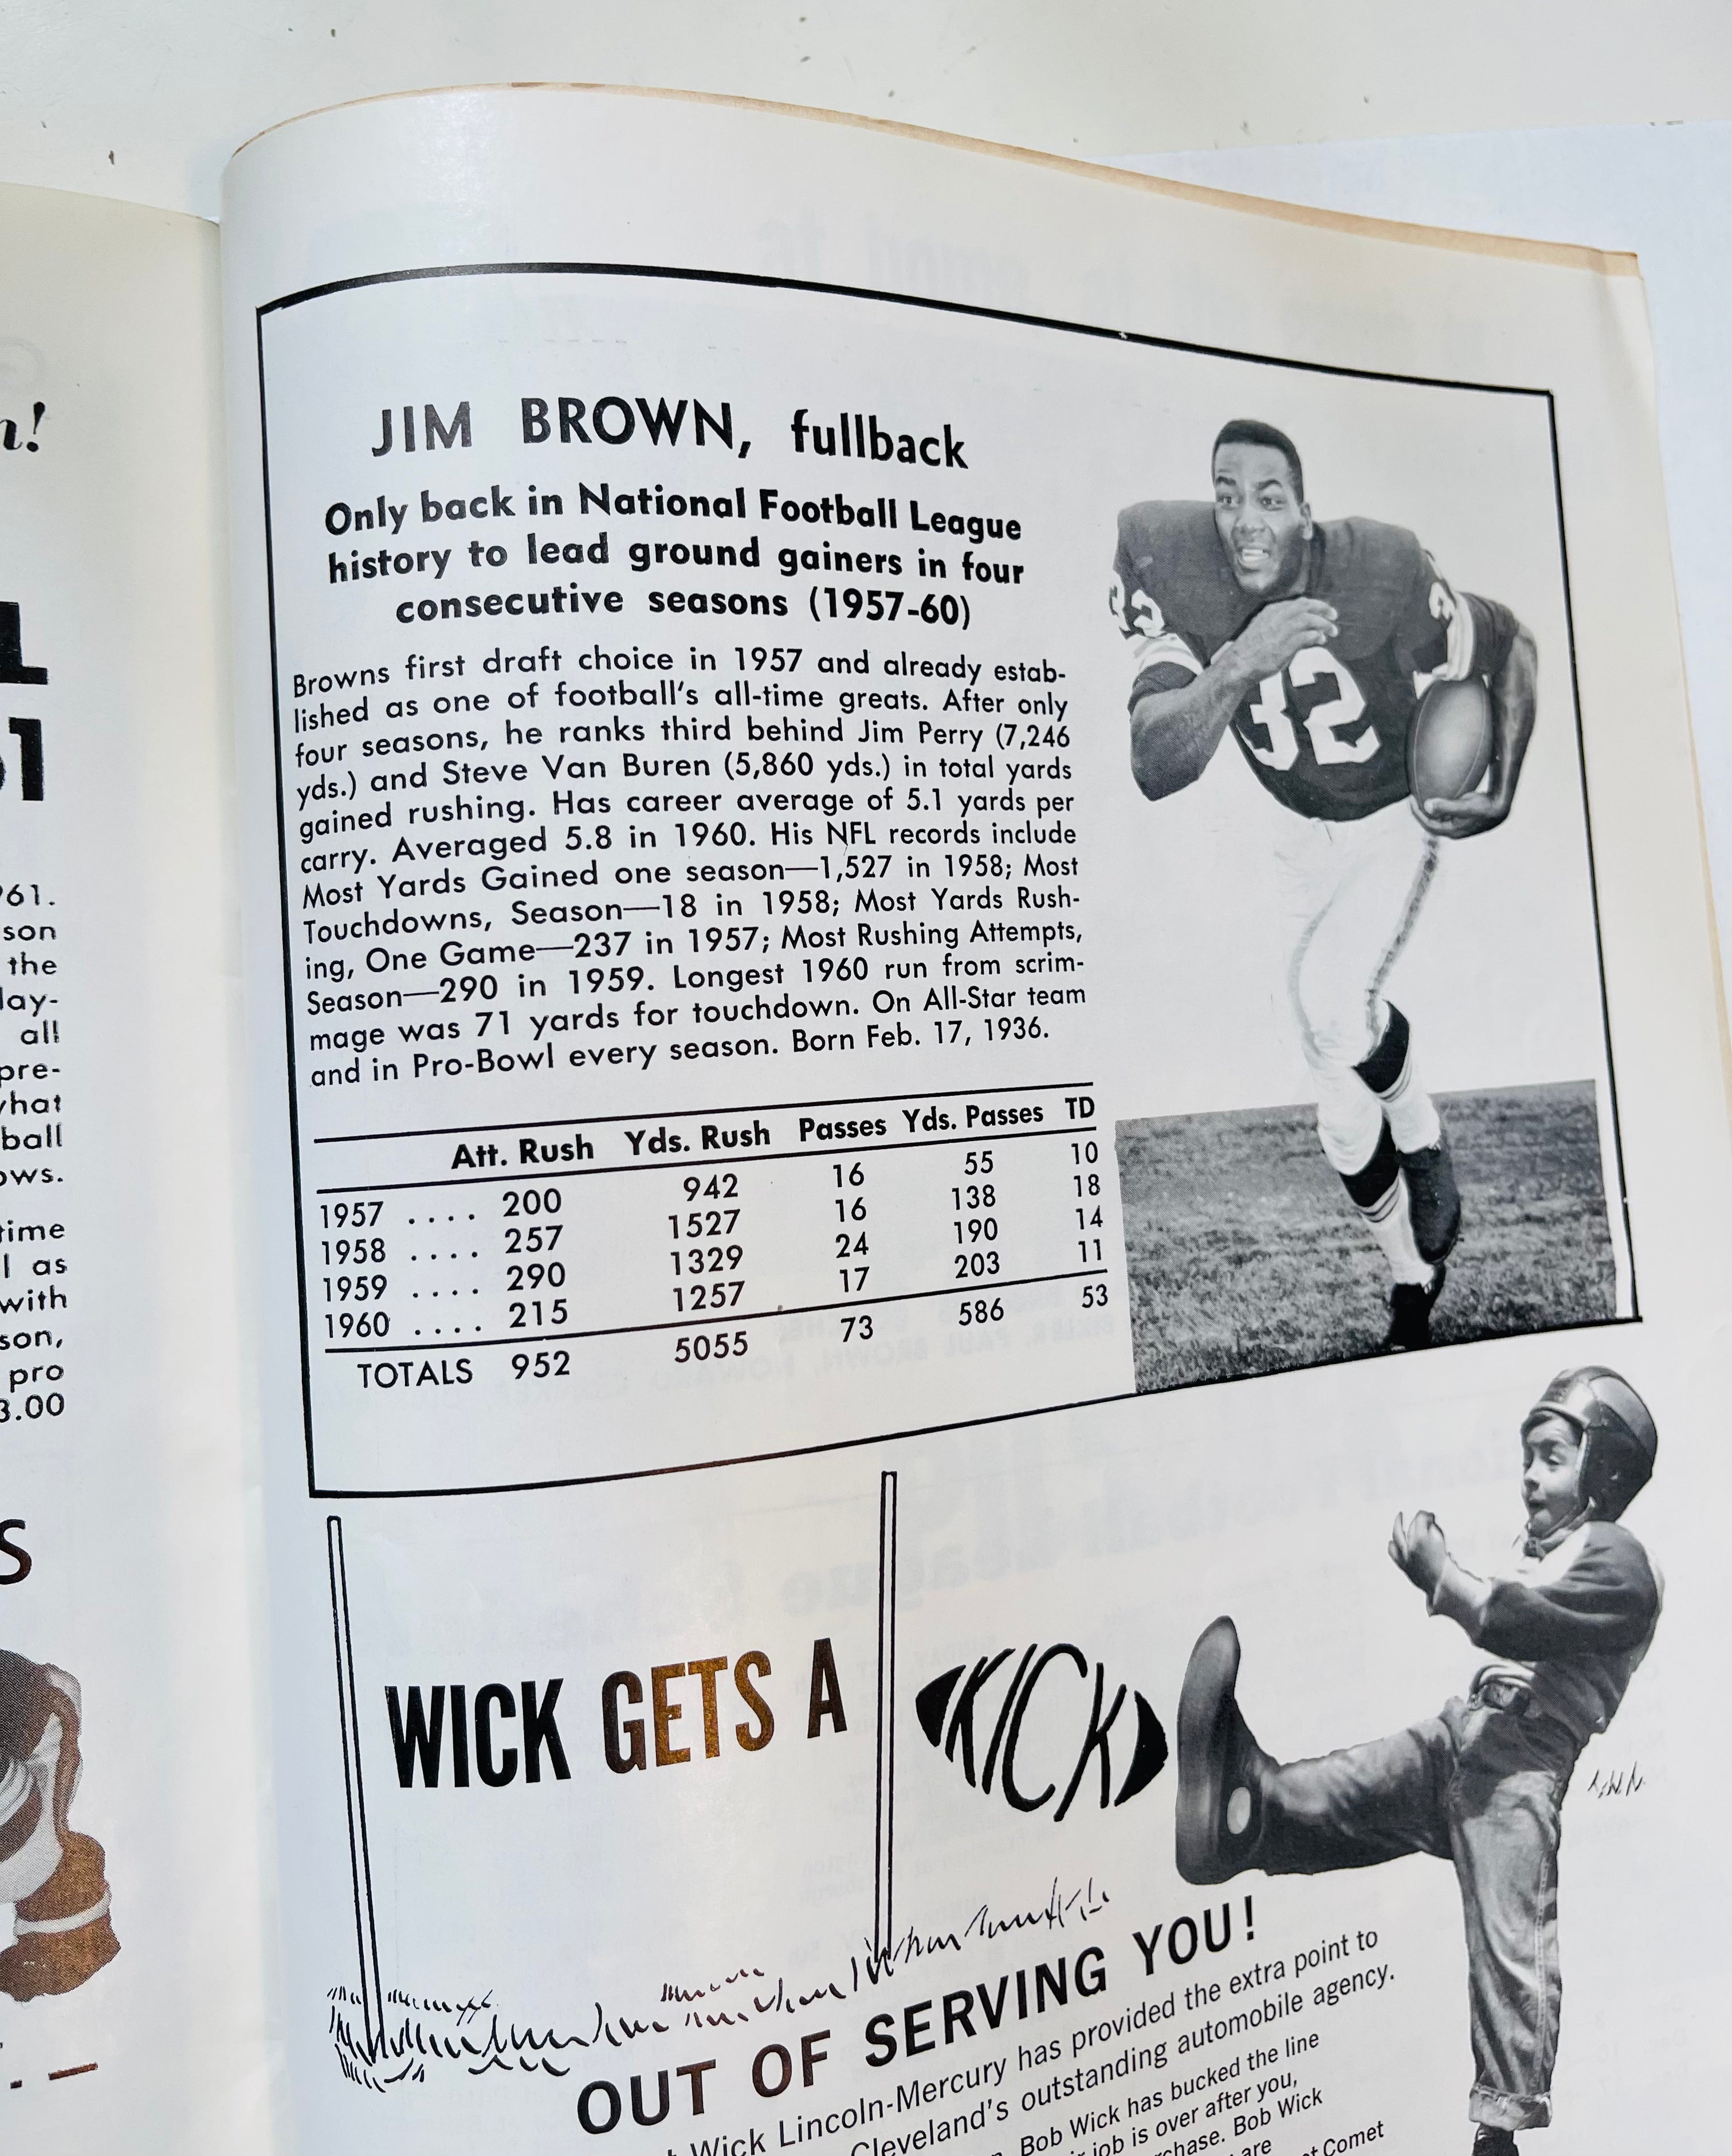 1961 Cleveland Browns vs Green Bay Packers rare game football program